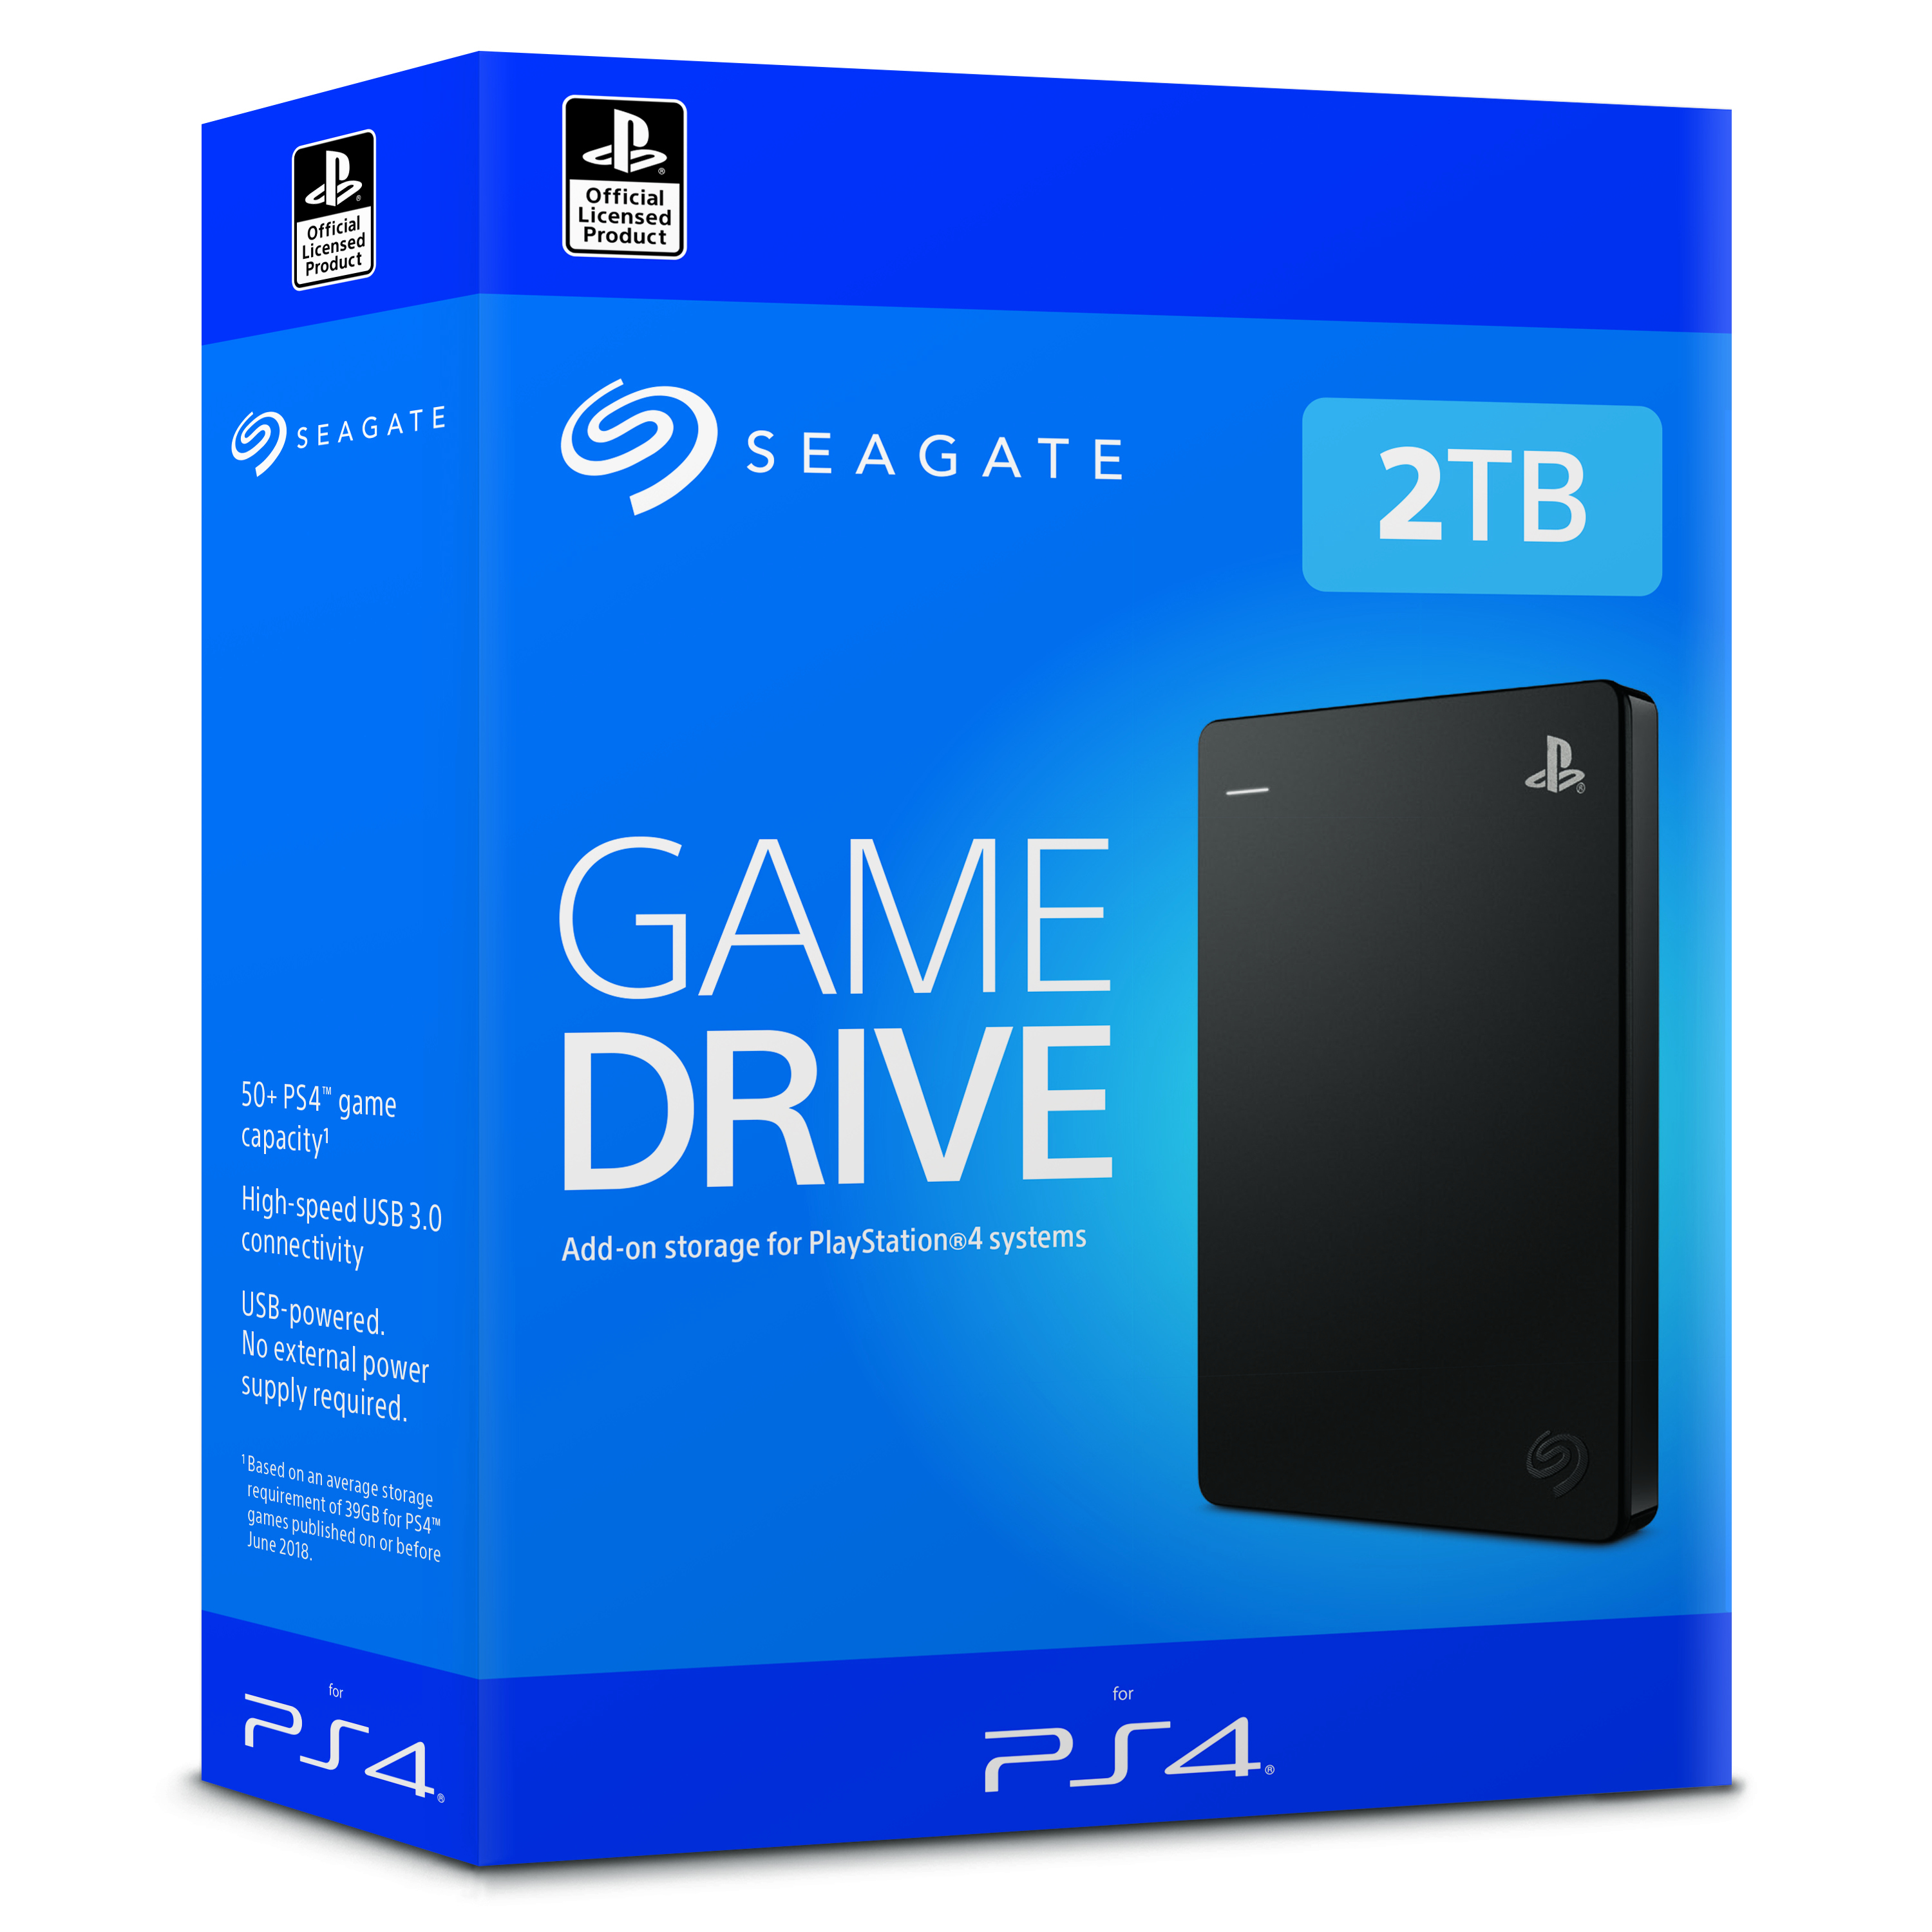 Seagate STGD2000200 | Seagate Game Drive - - STGD2000200 PS4 - Festplatte (tragbar) extern TB for 2